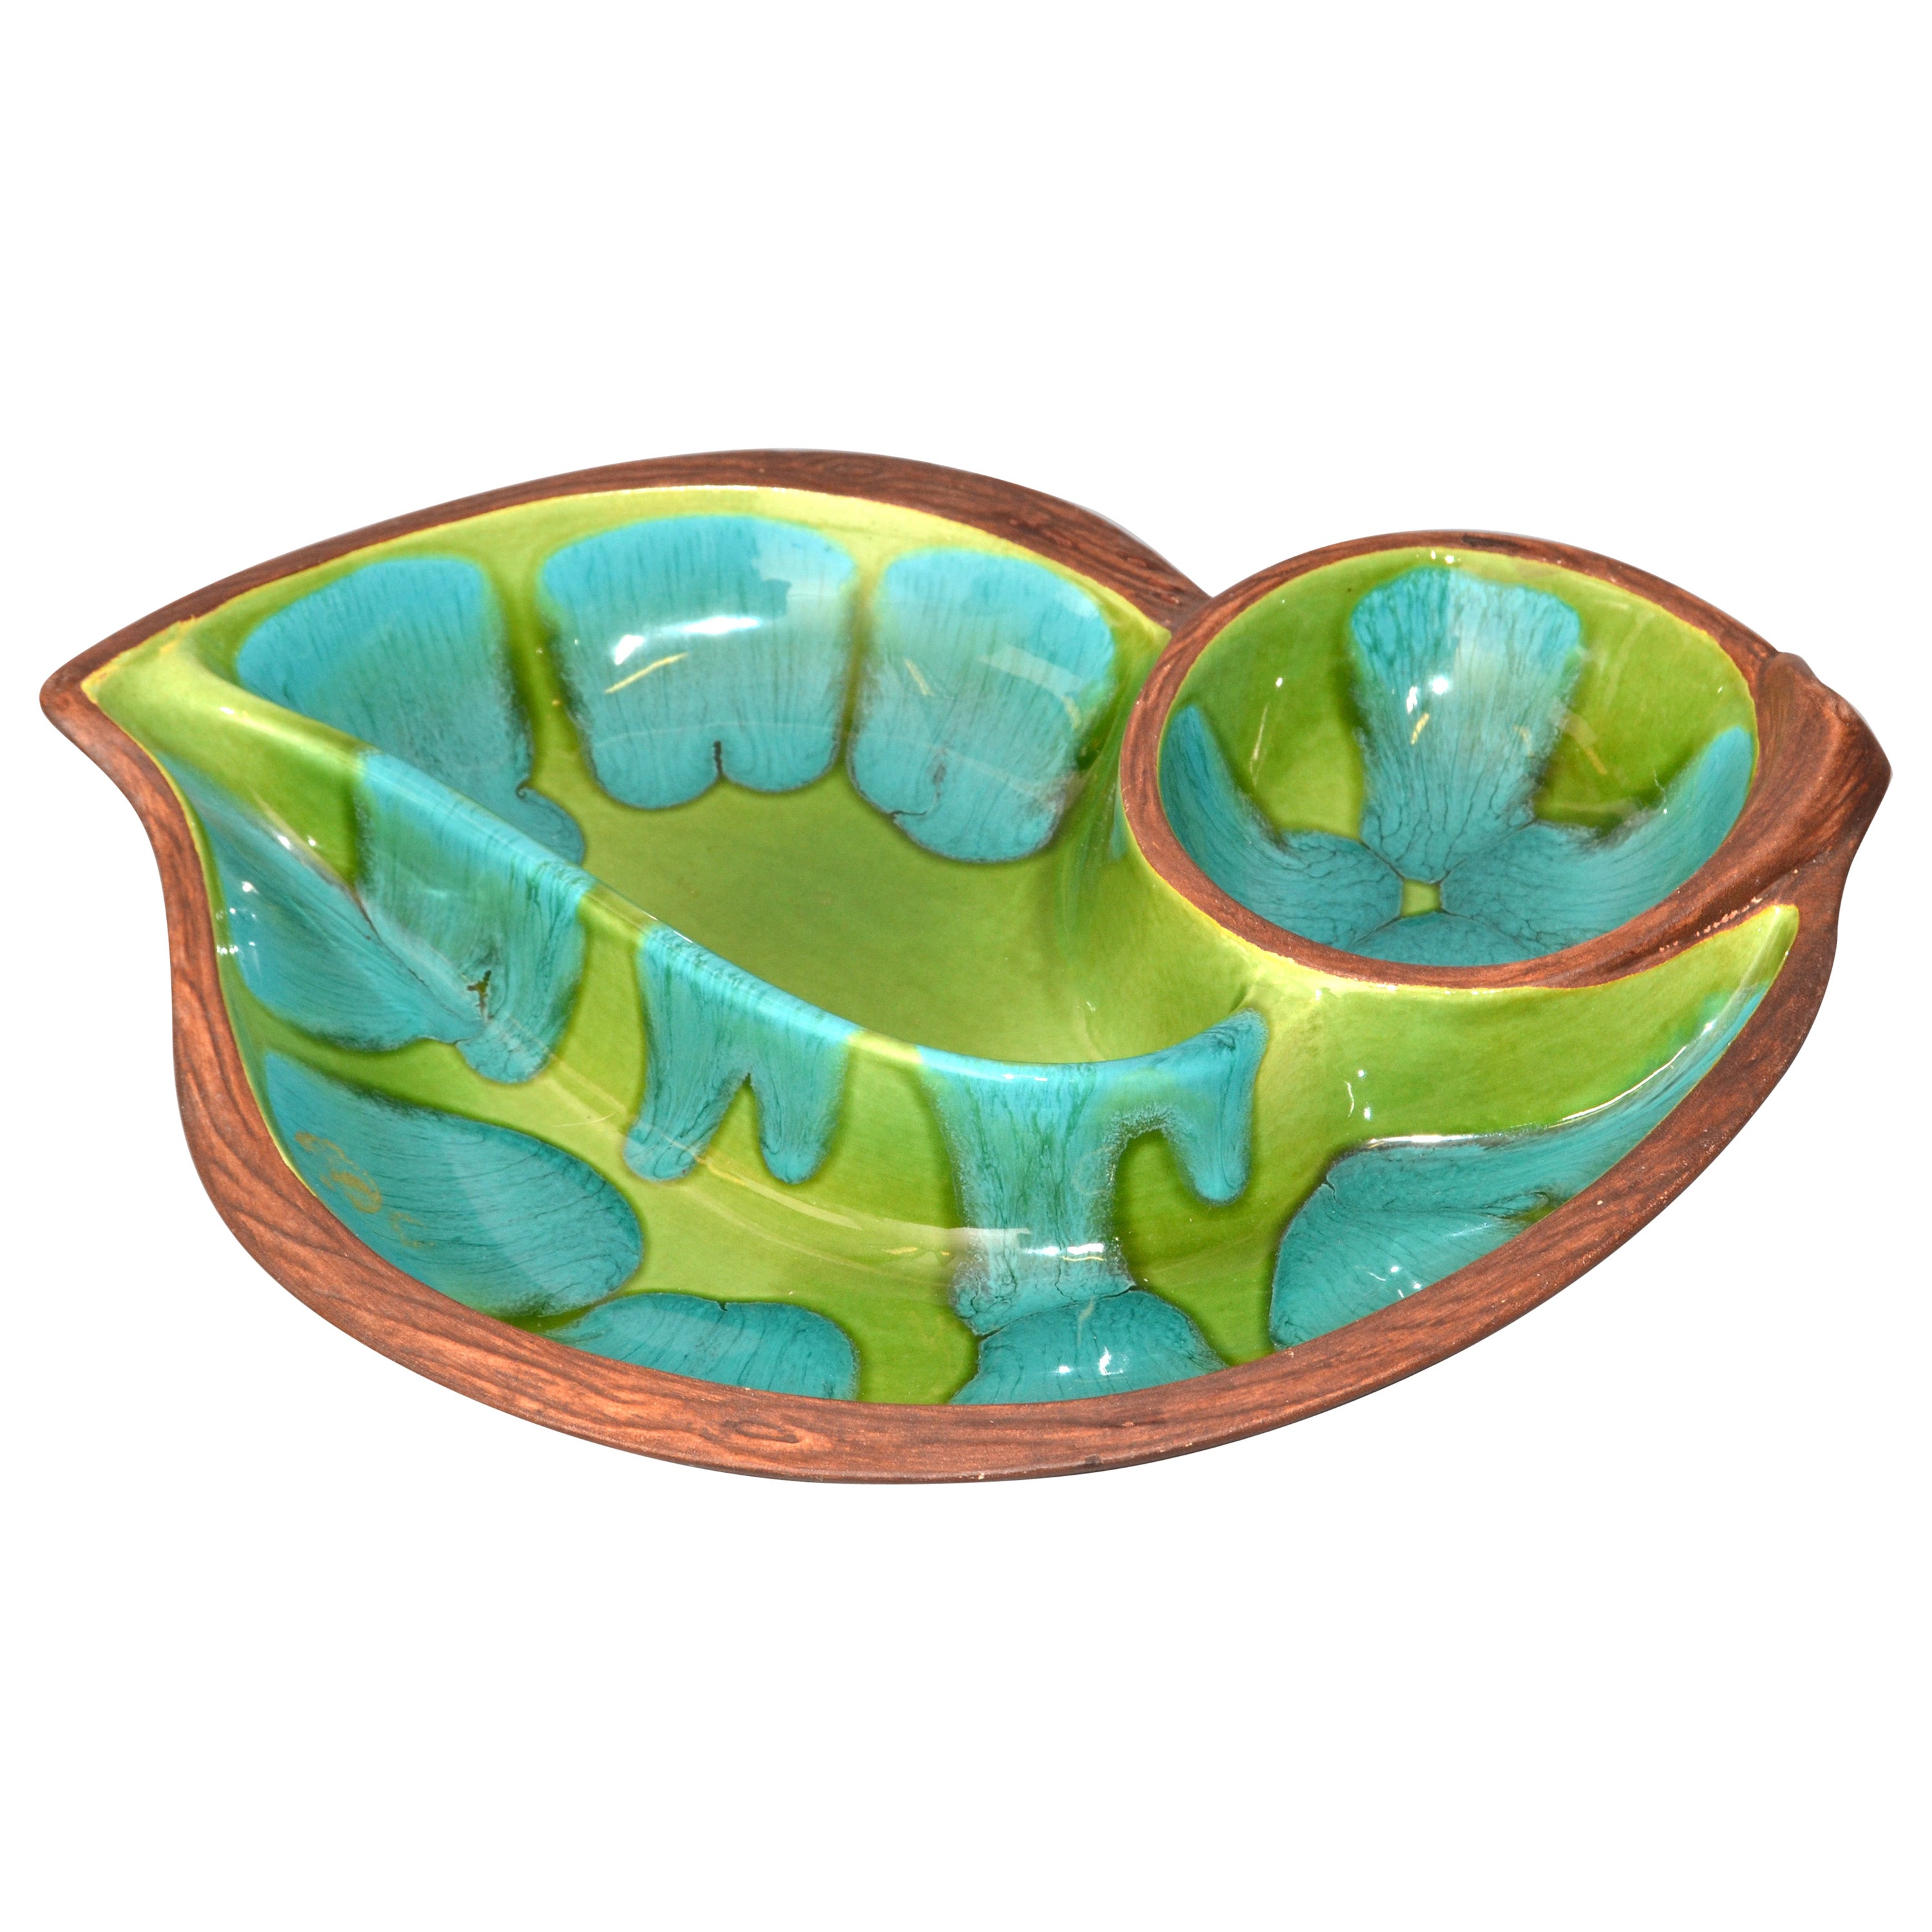 Brown Green Turquoise Glazed Ceramic Pottery Dish Mid-Century Modern, USA For Sale